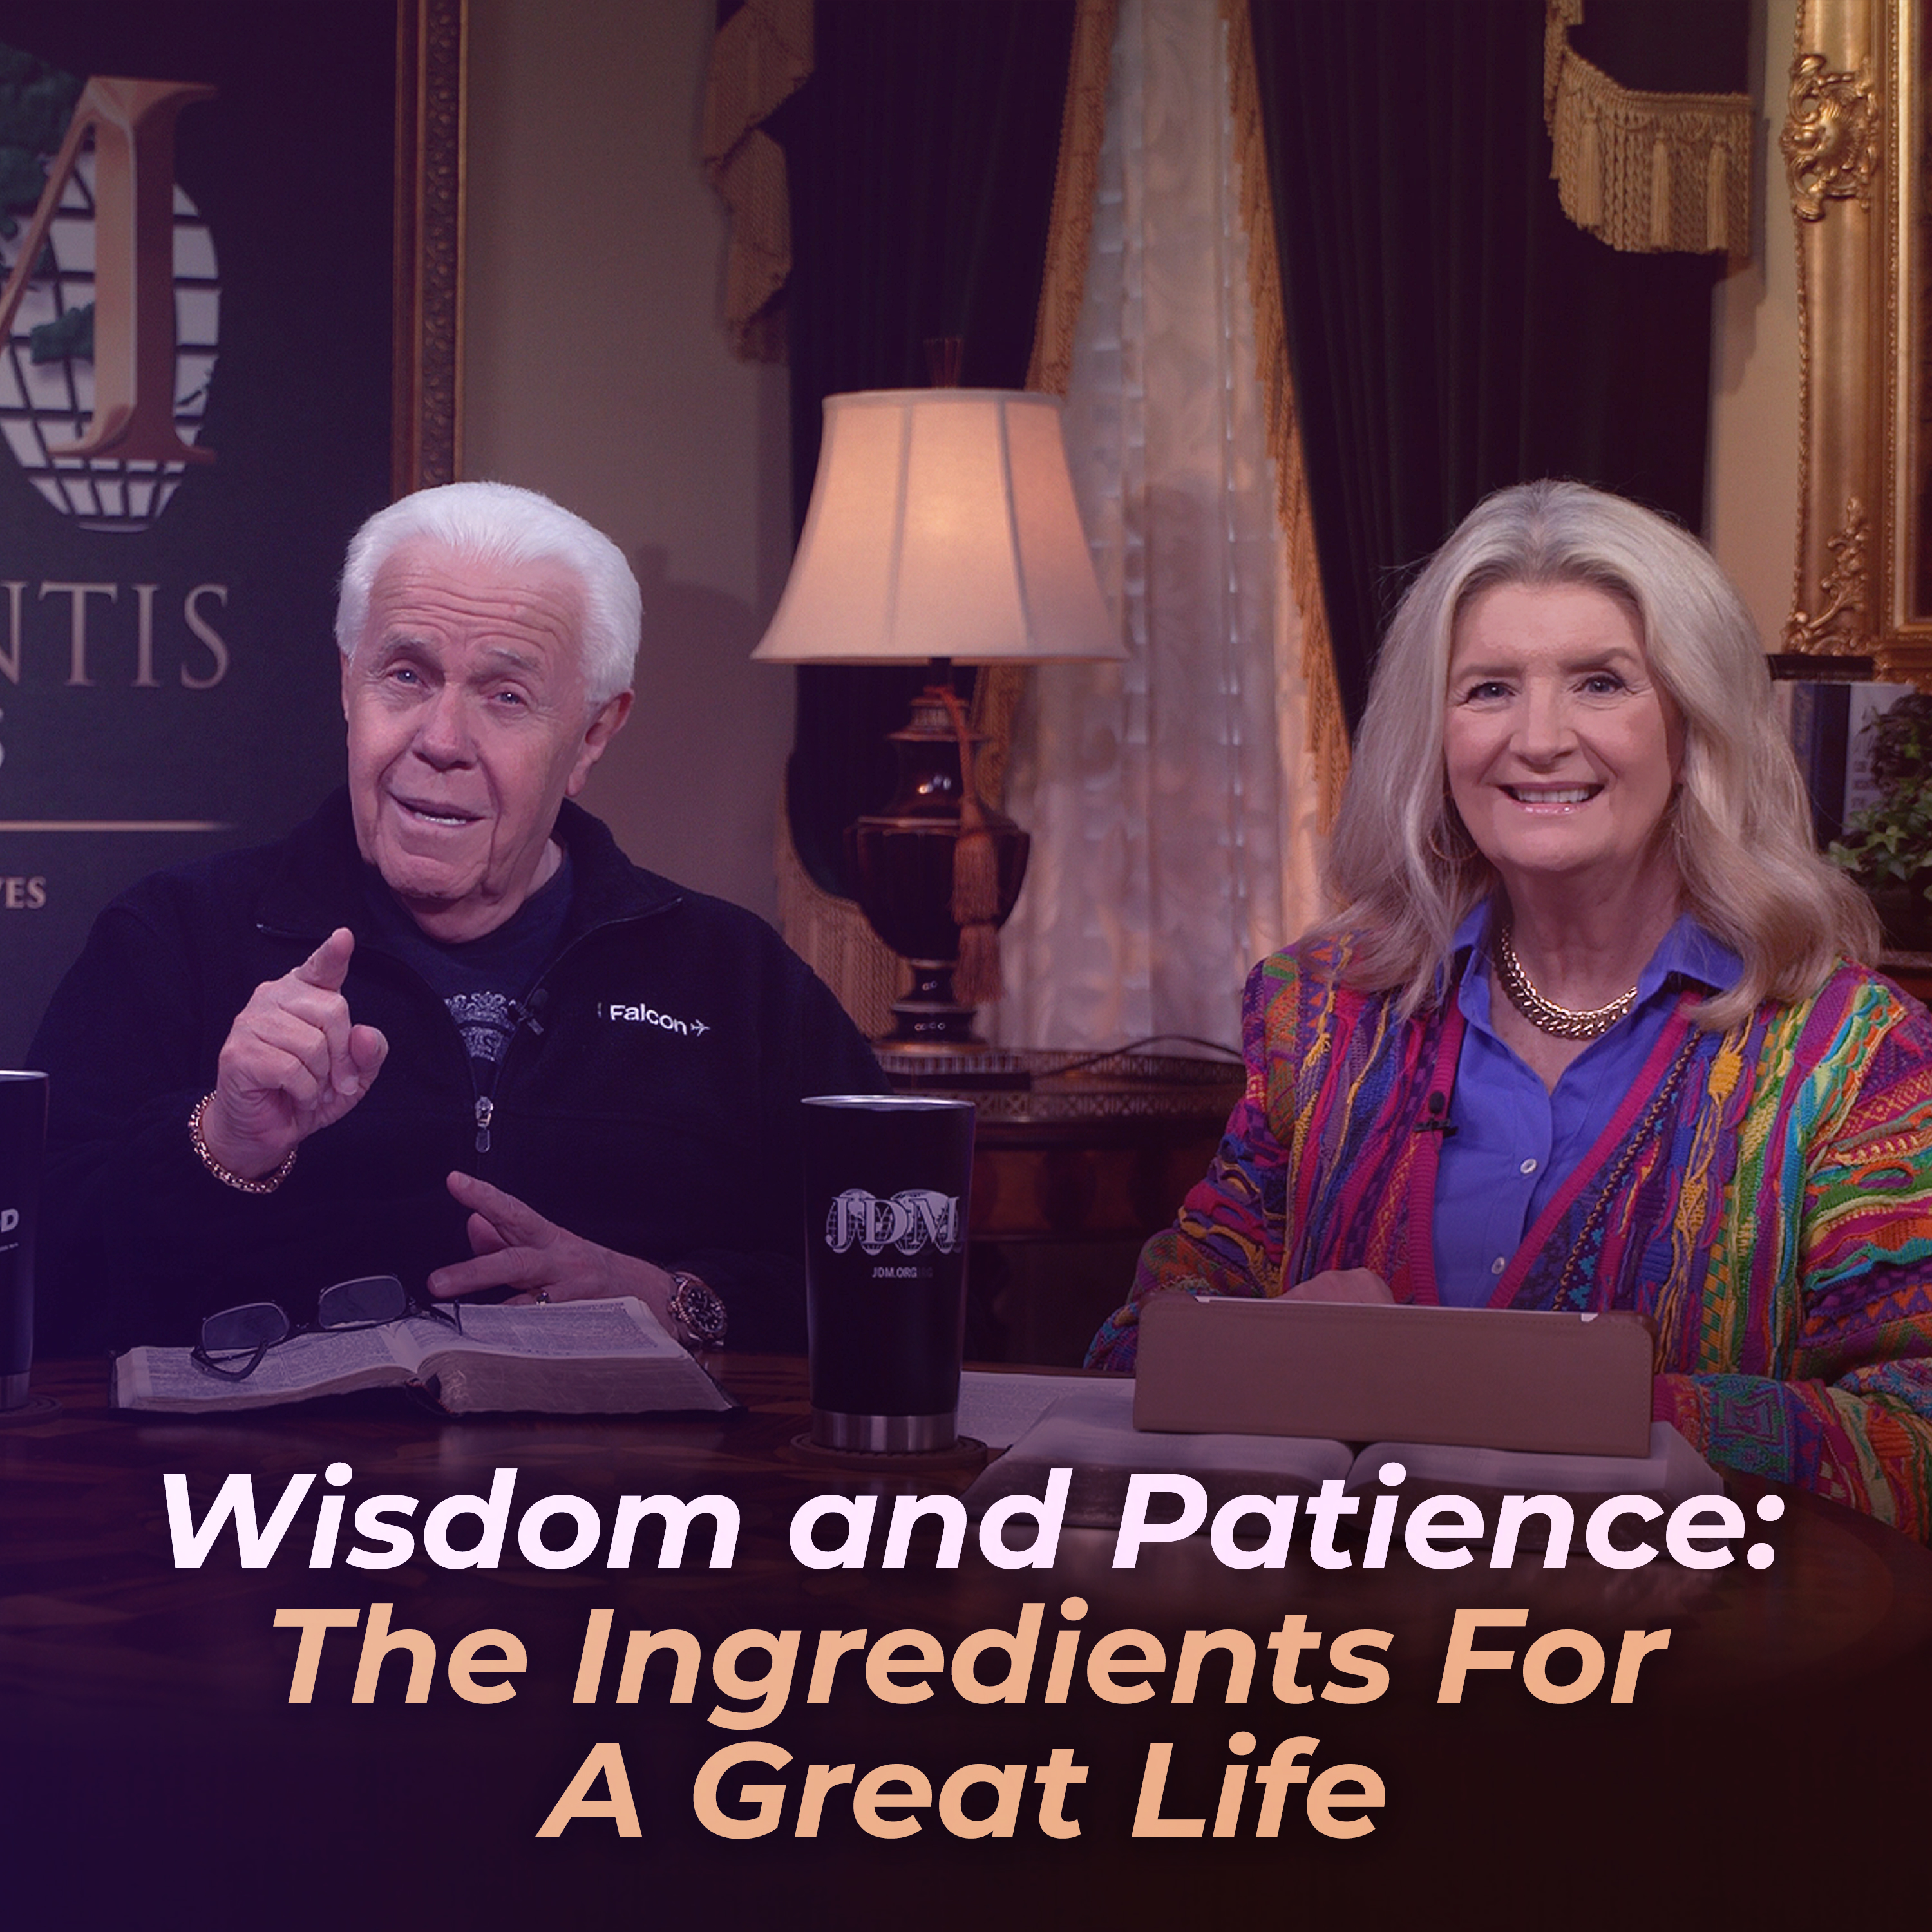 Wisdom and Patience: The Ingredients For A Great Life